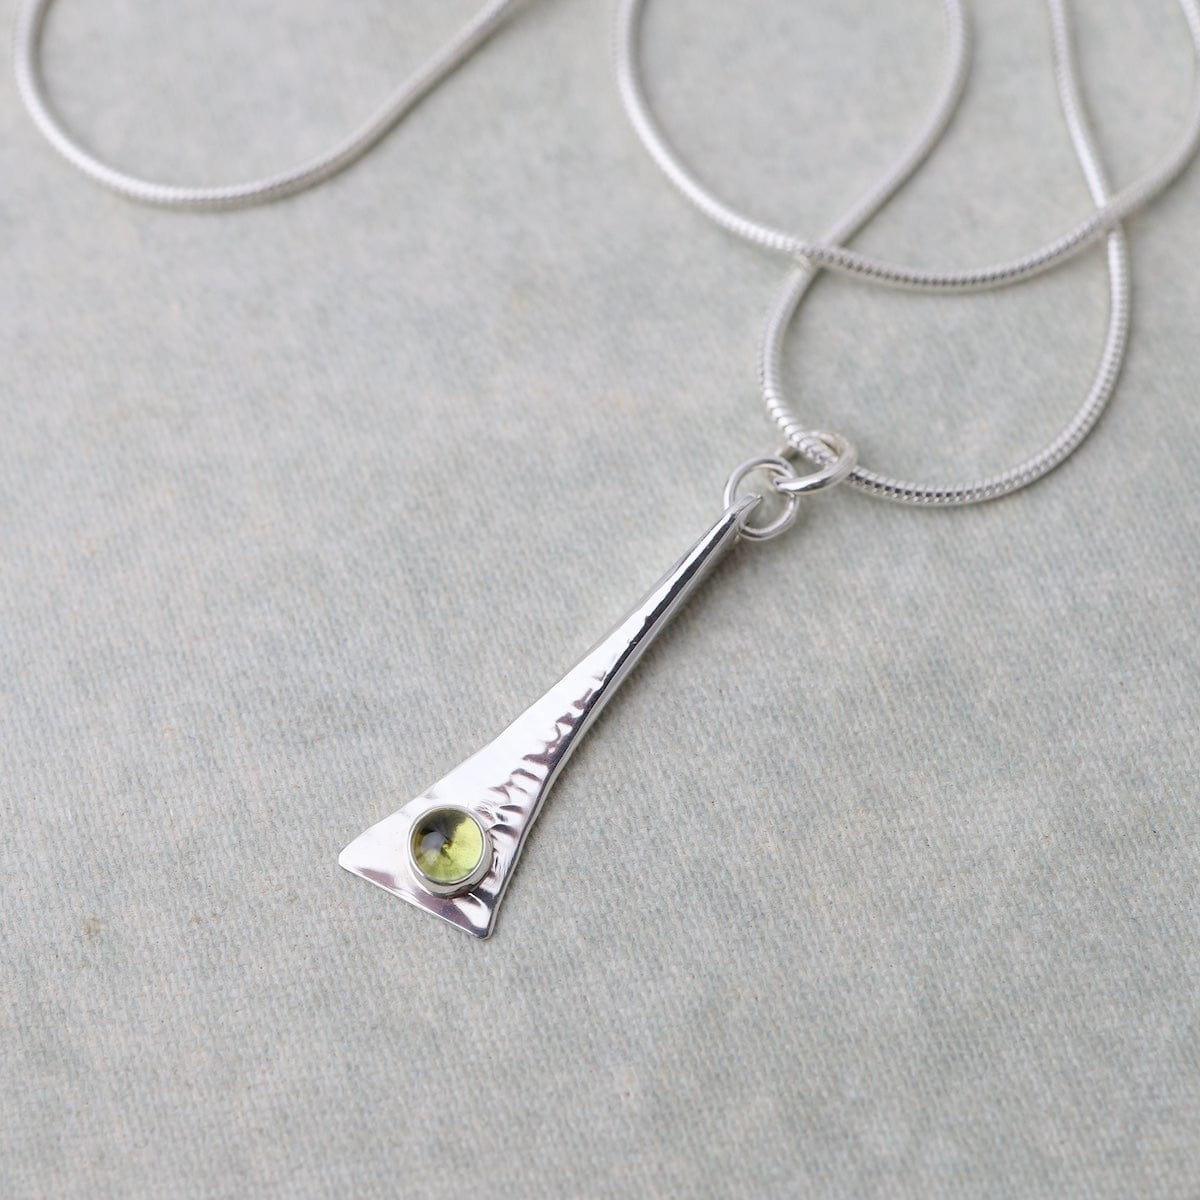 NKL Elongated Pendant Necklace with Peridot